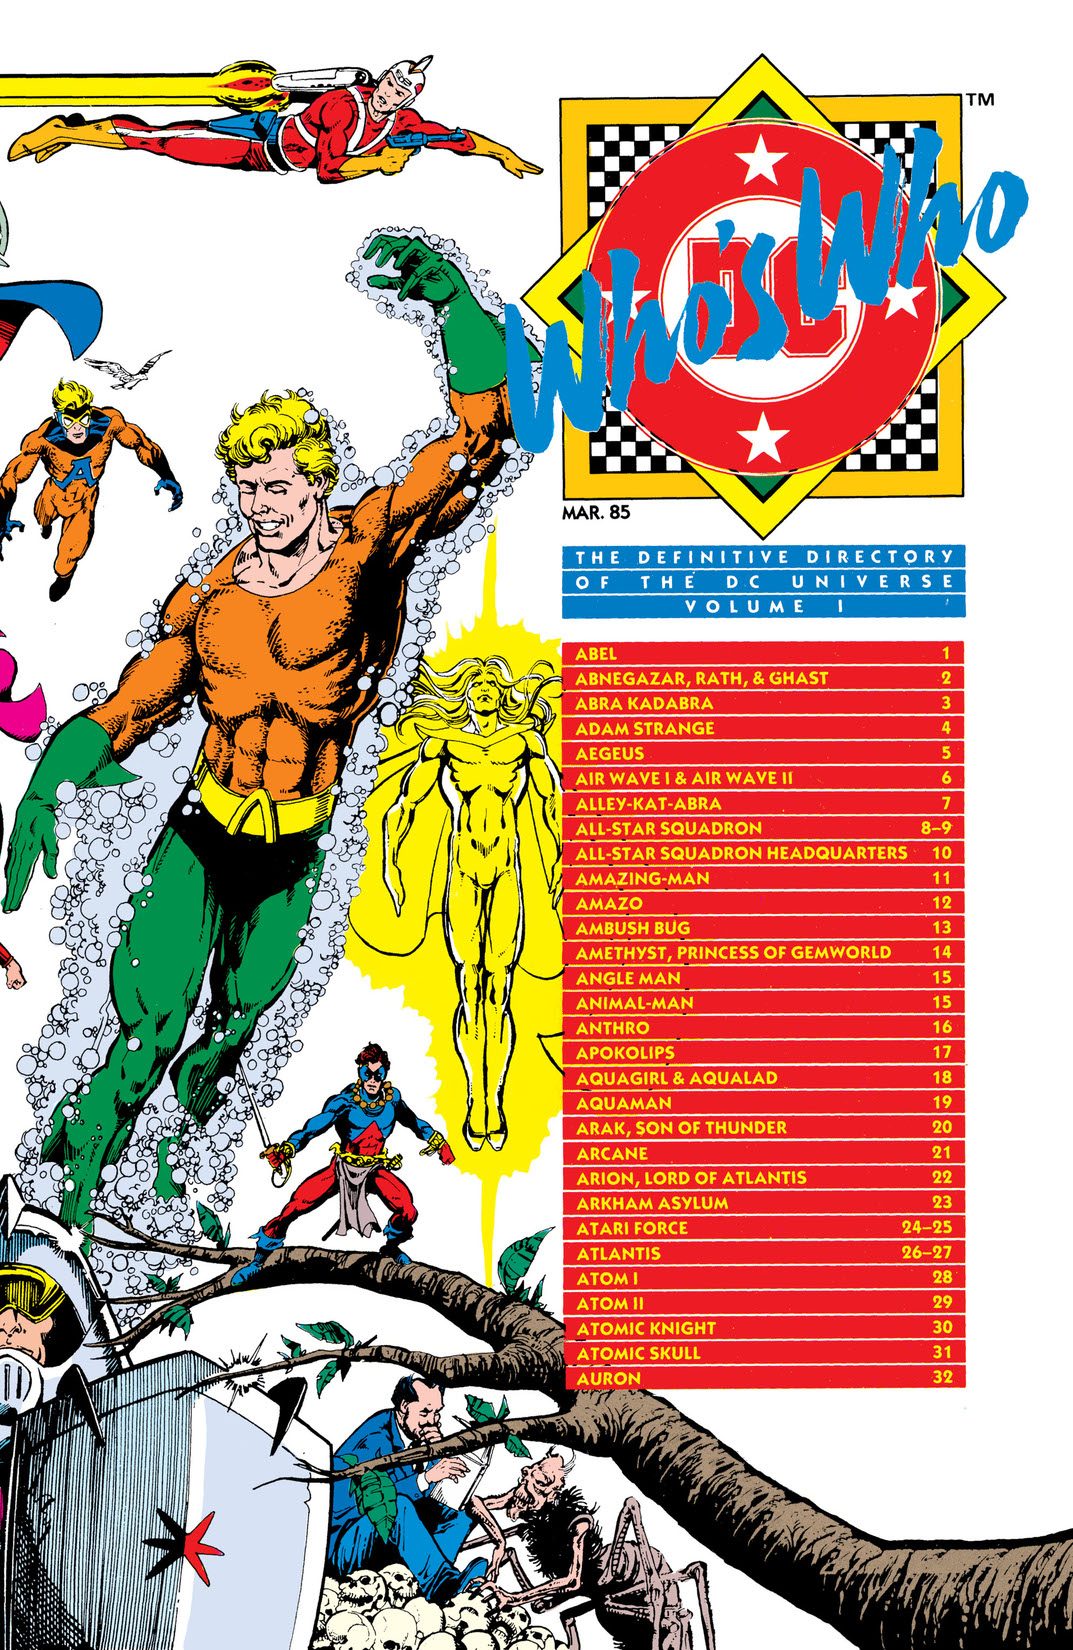 Who's Who: The Definitive Directory of the DC Universe #1 preview images